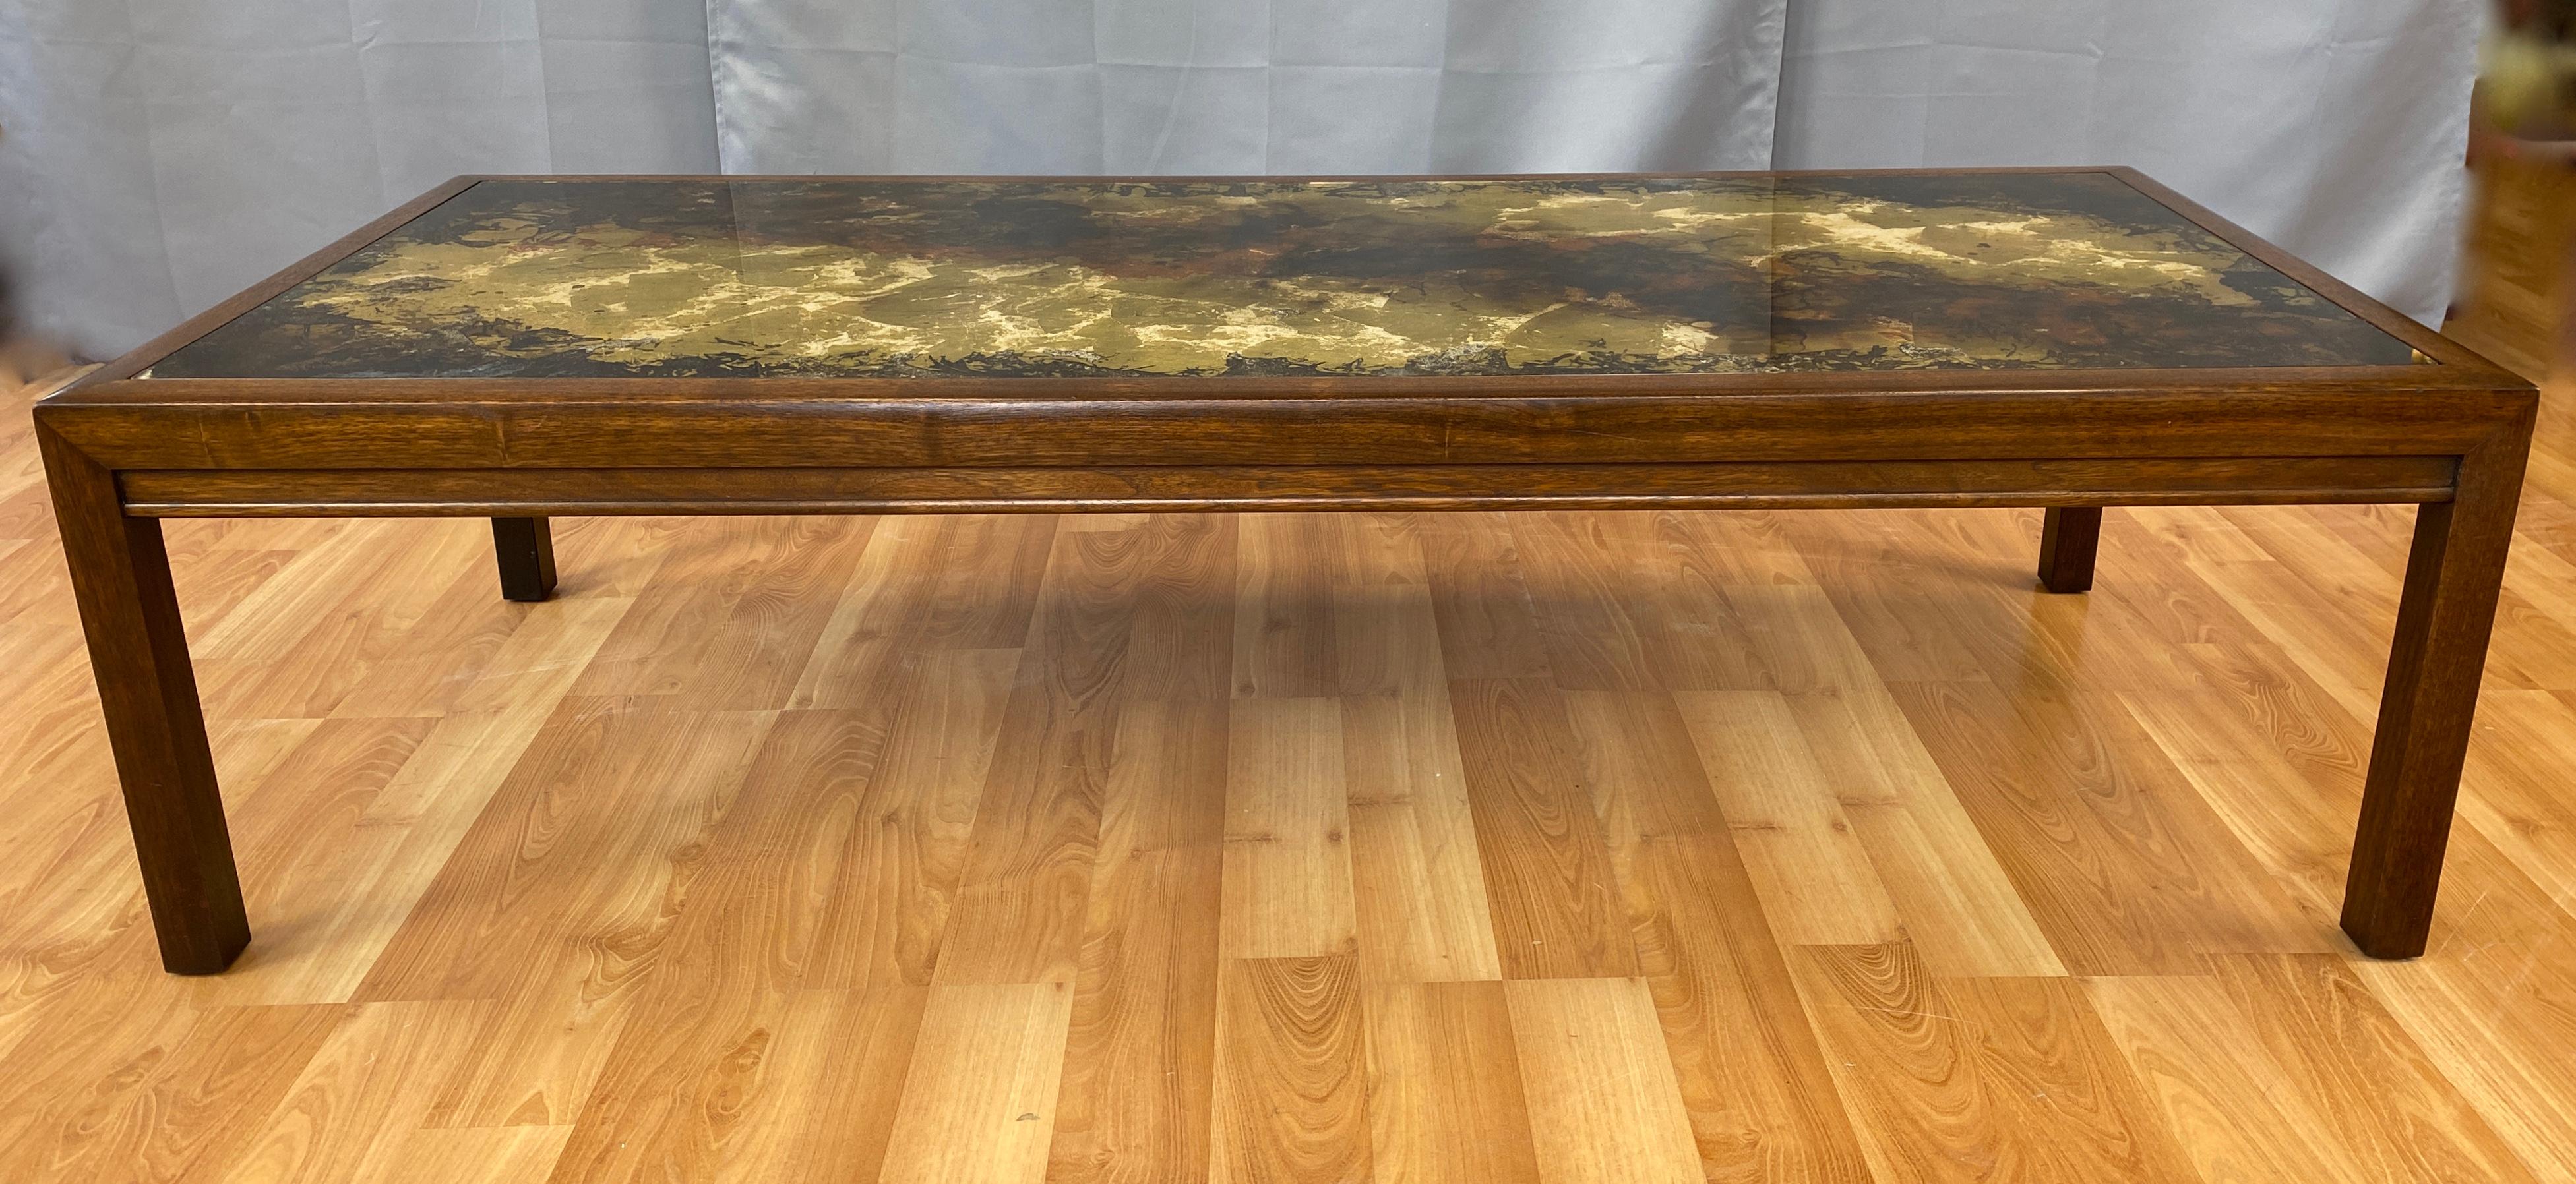 American Églomisé Gold Leaf and Hand-Painted Glass Top Teak Coffee Table, 1970s